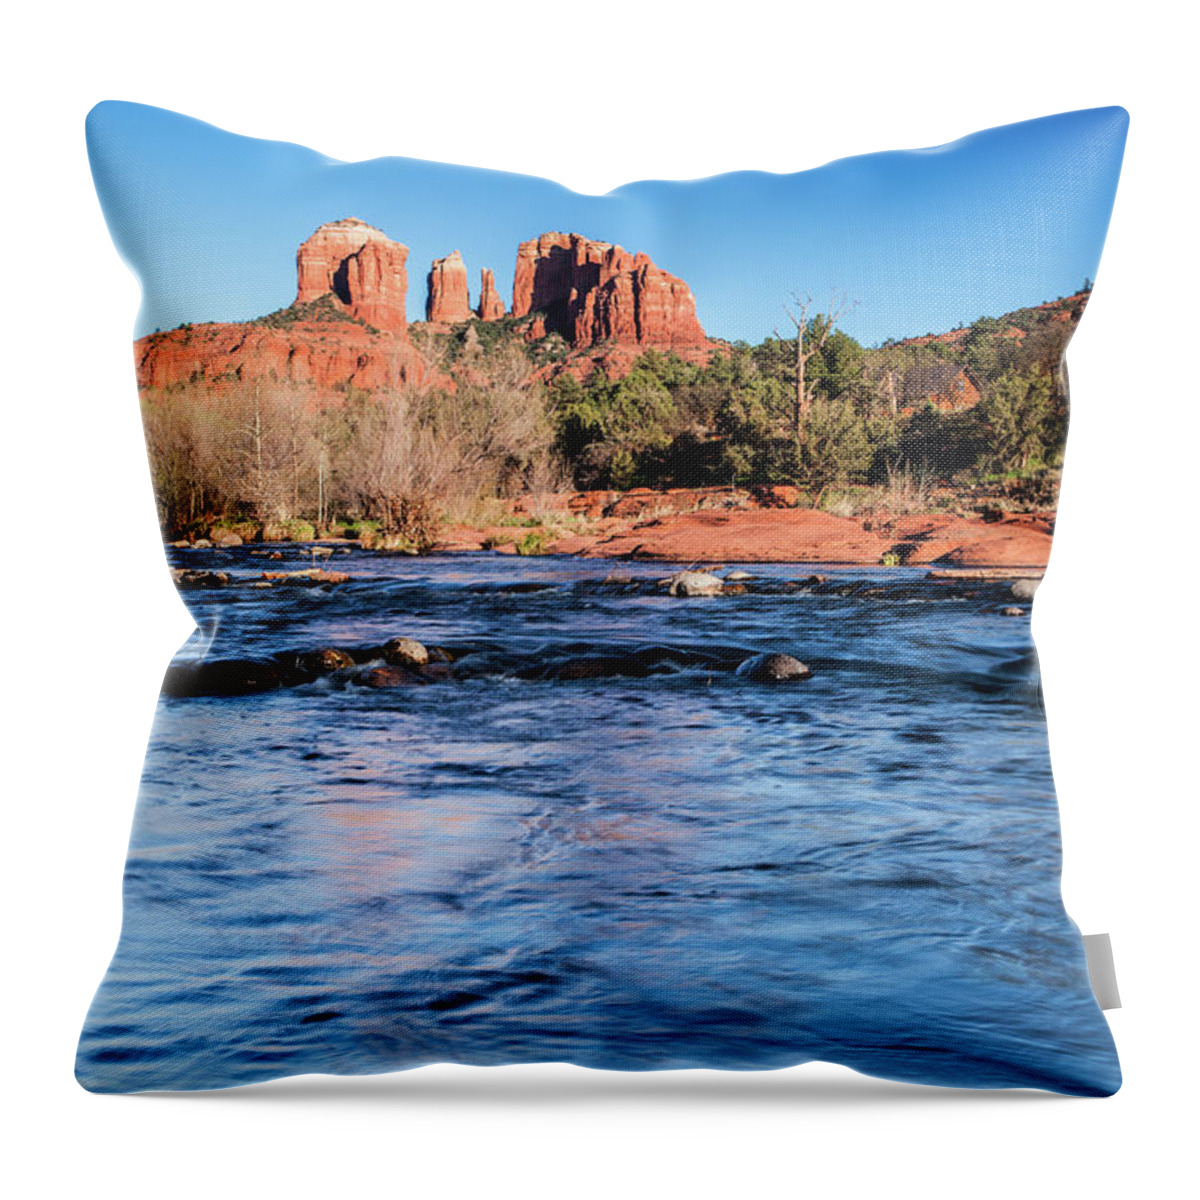 Scenics Throw Pillow featuring the photograph Cathedral Rock #4 by Jgareri